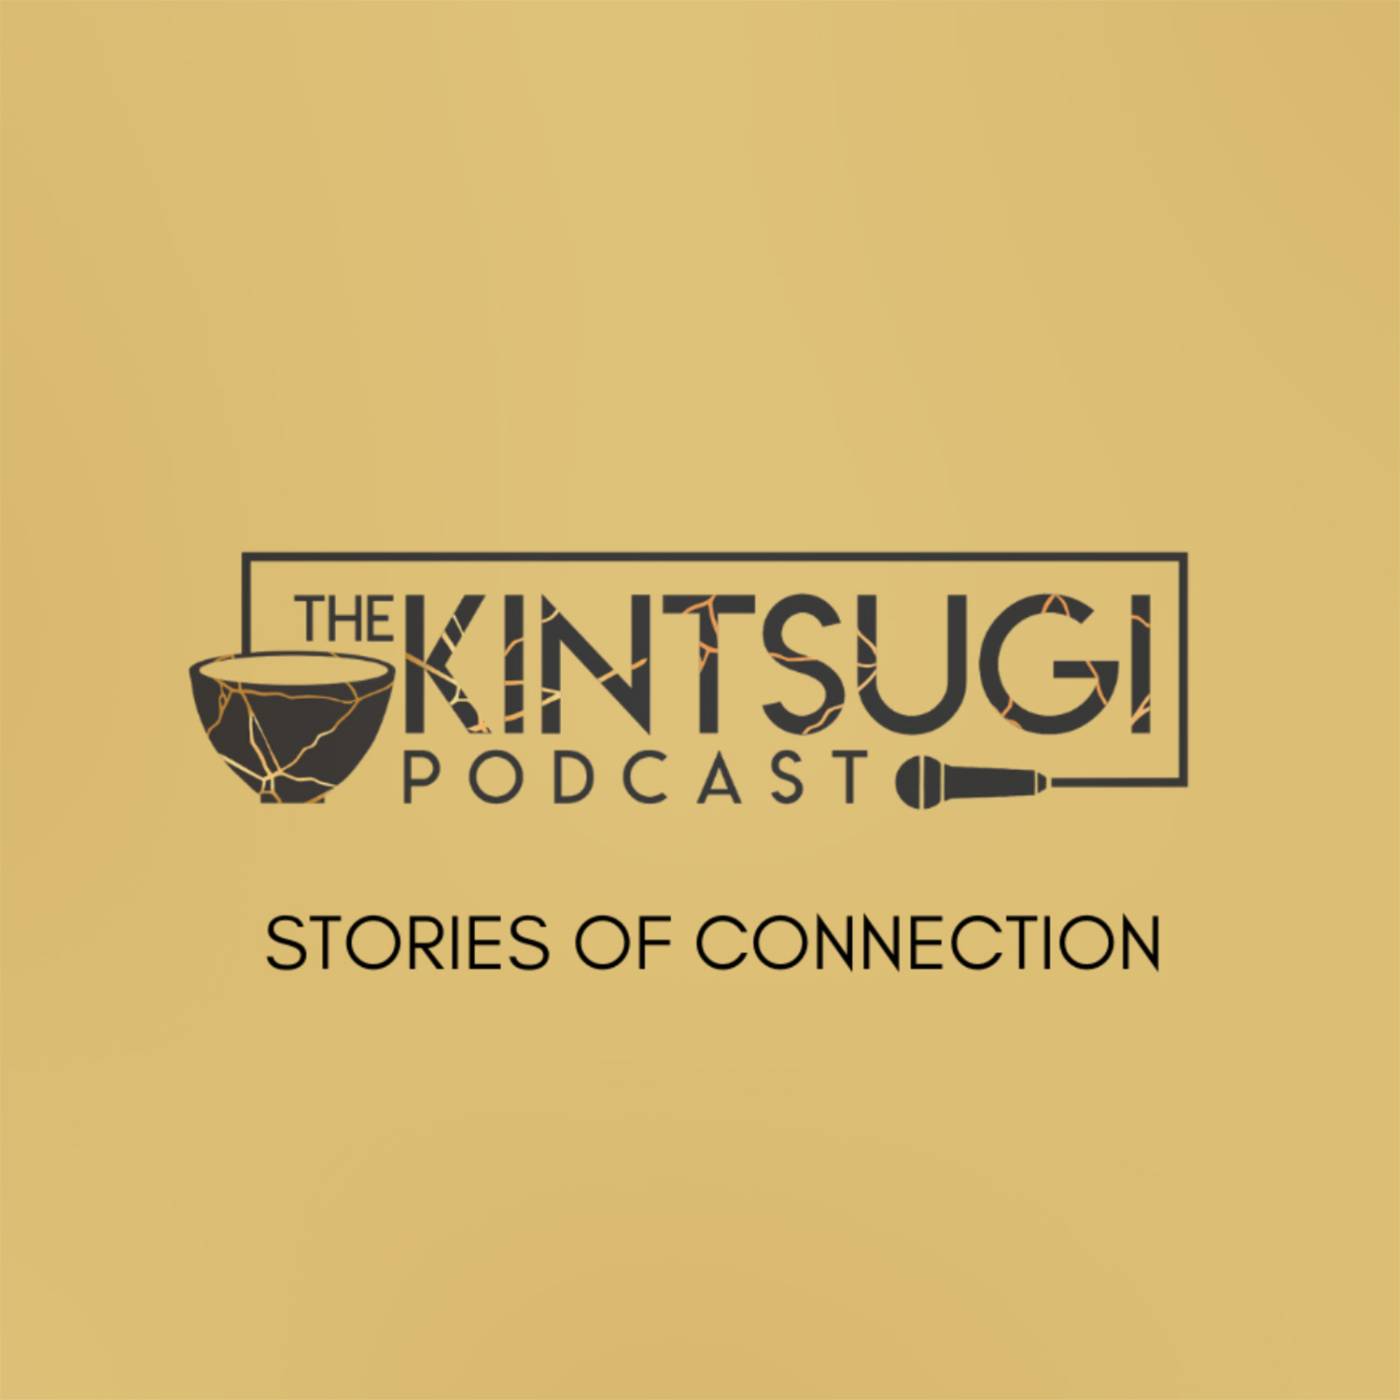 The Kintsugi Podcast - Stories of Connection Artwork